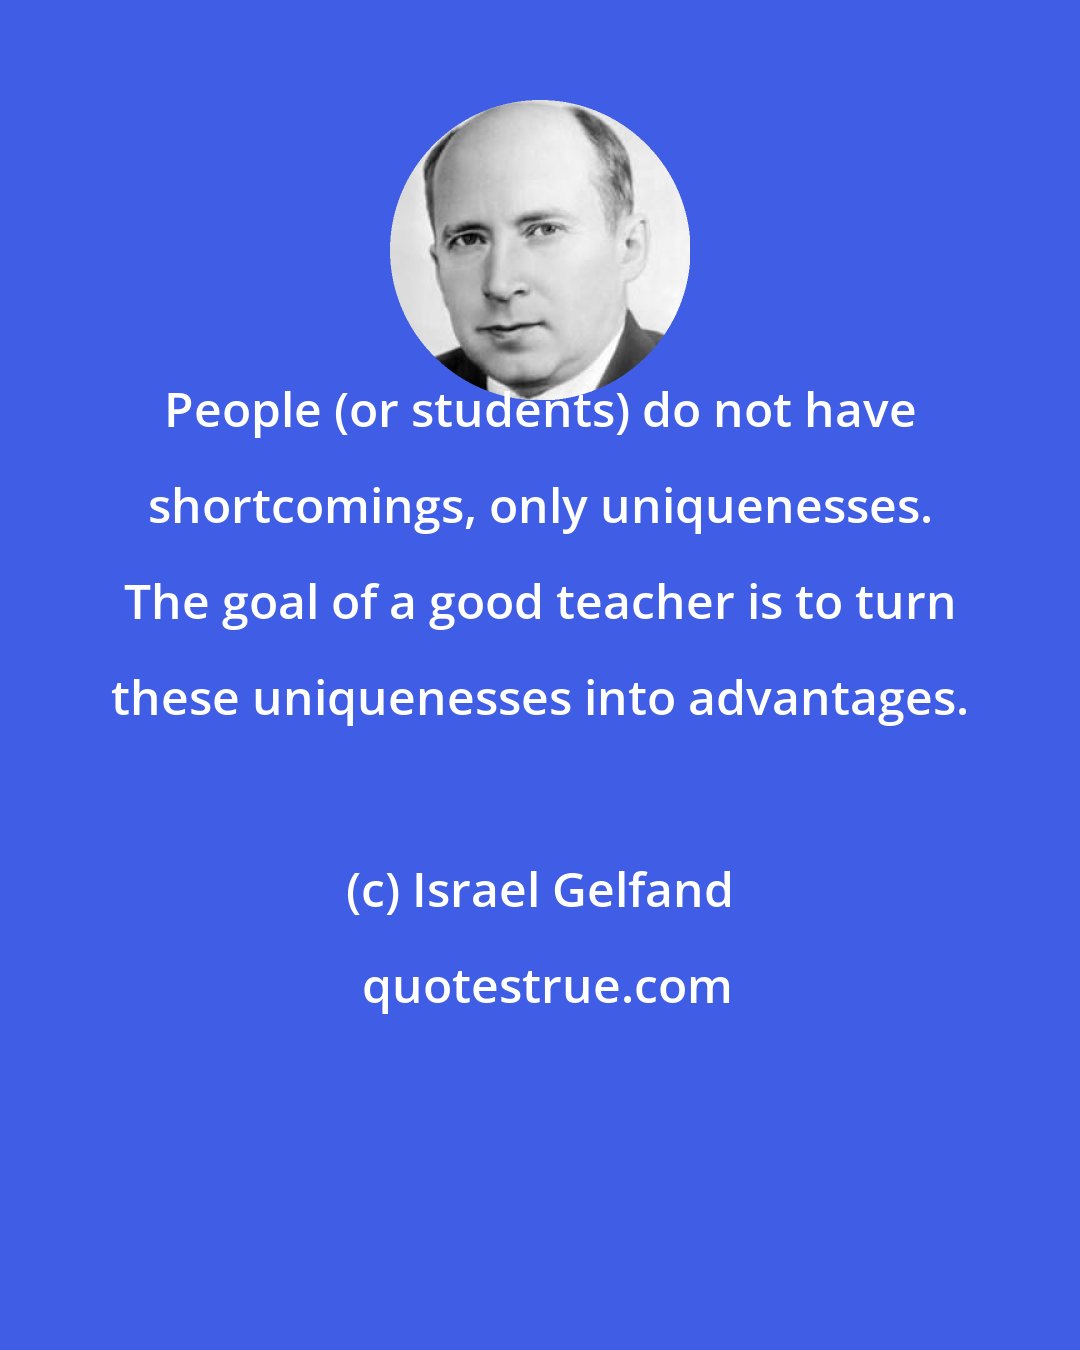 Israel Gelfand: People (or students) do not have shortcomings, only uniquenesses. The goal of a good teacher is to turn these uniquenesses into advantages.